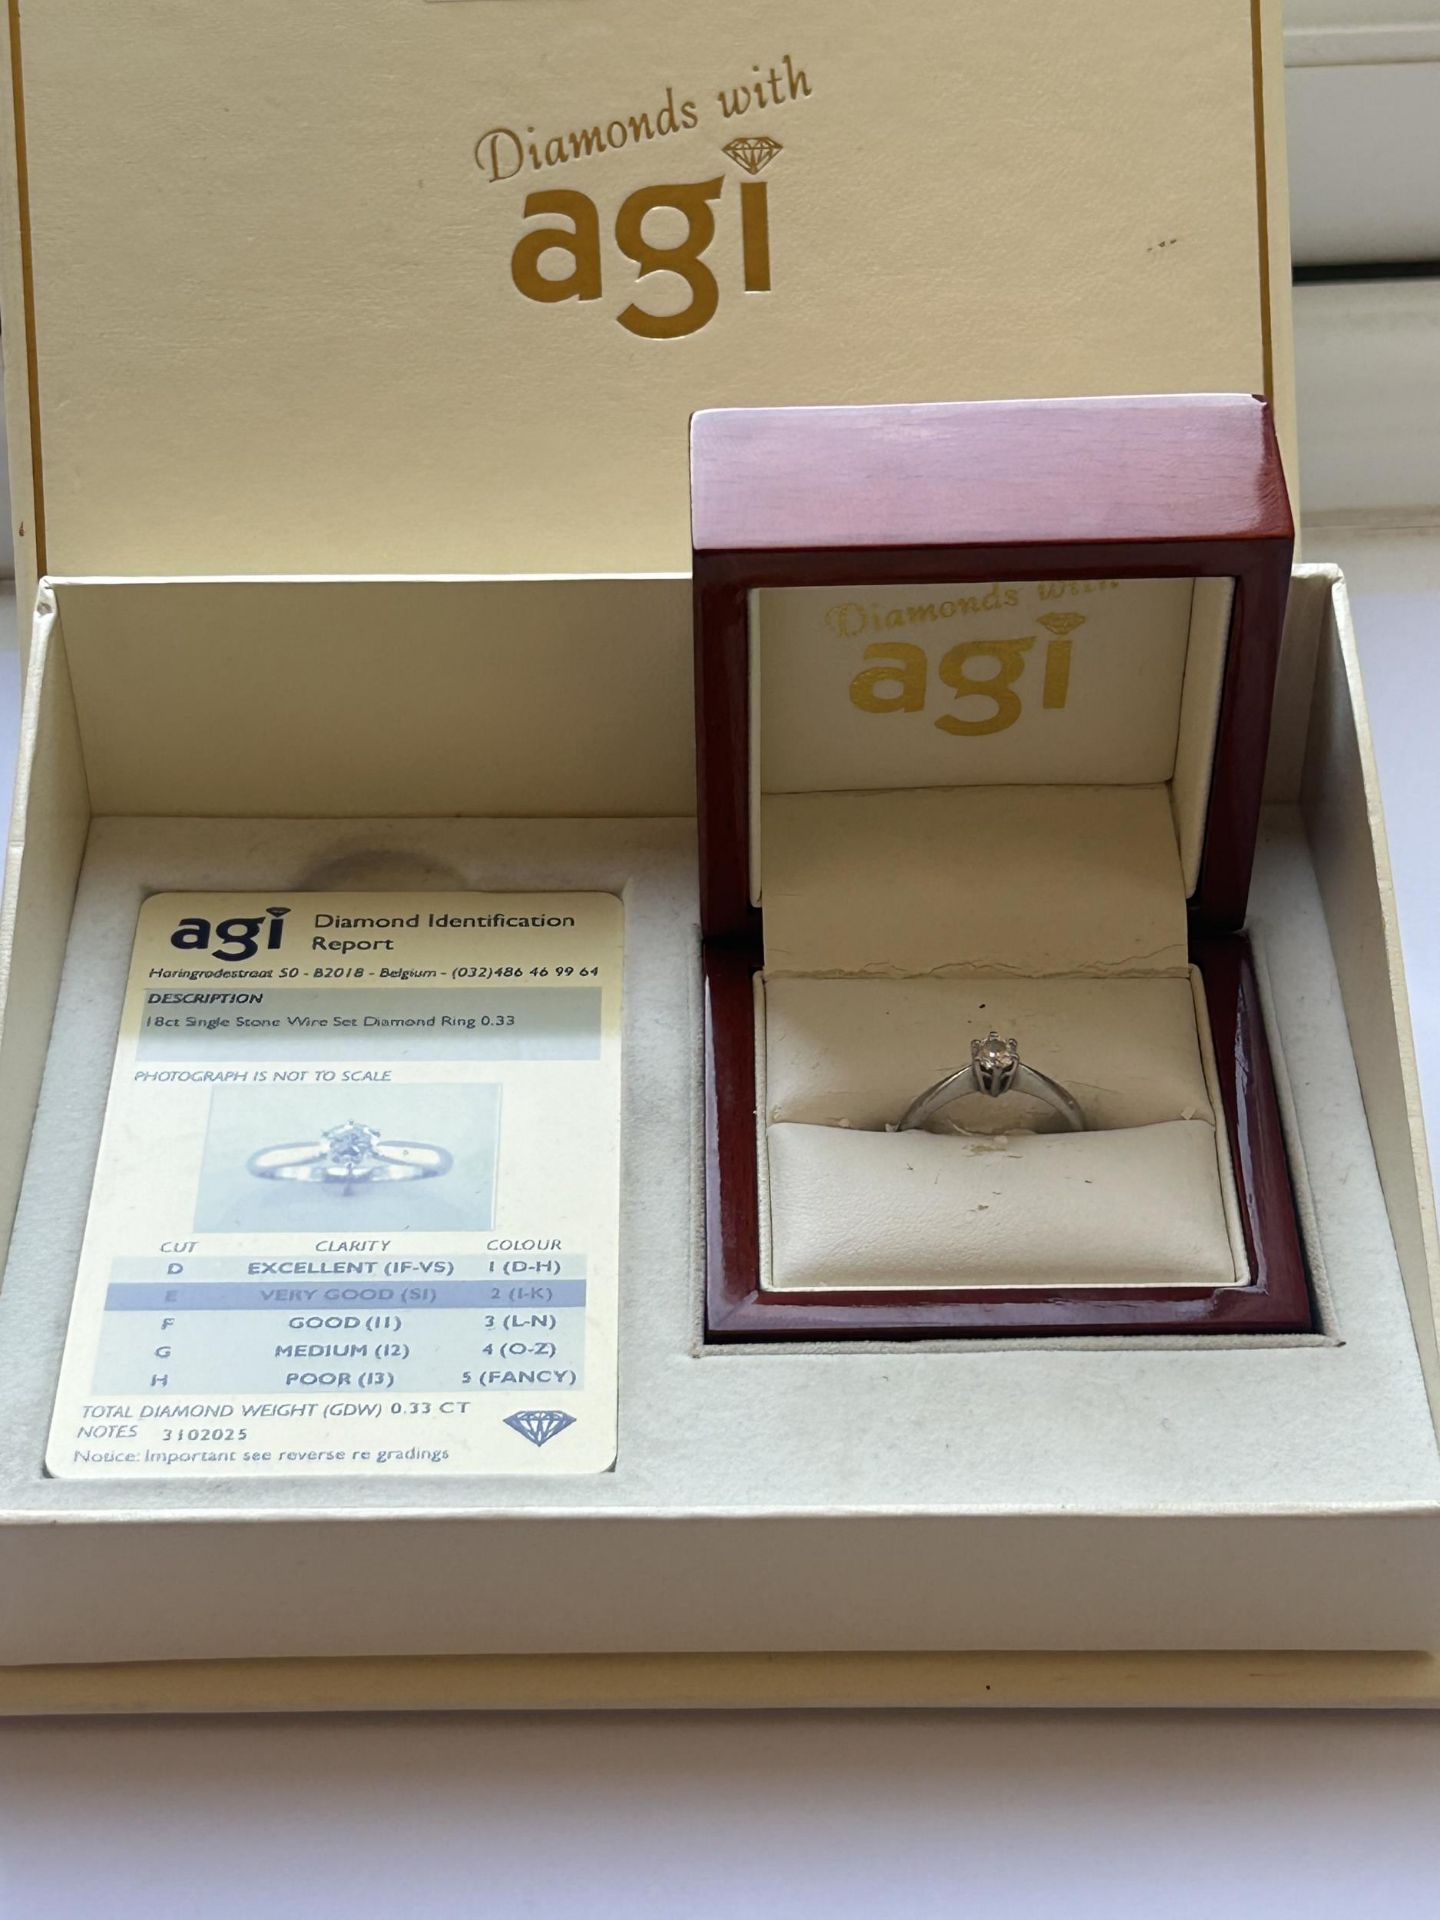 AN 18 CARAT WHITE GOLD DIAMOND SOLITAIRE RING WITH A 0.33 CARAT DIAMOND WITH A 'VERY GOOD' QUALITY E - Image 4 of 4